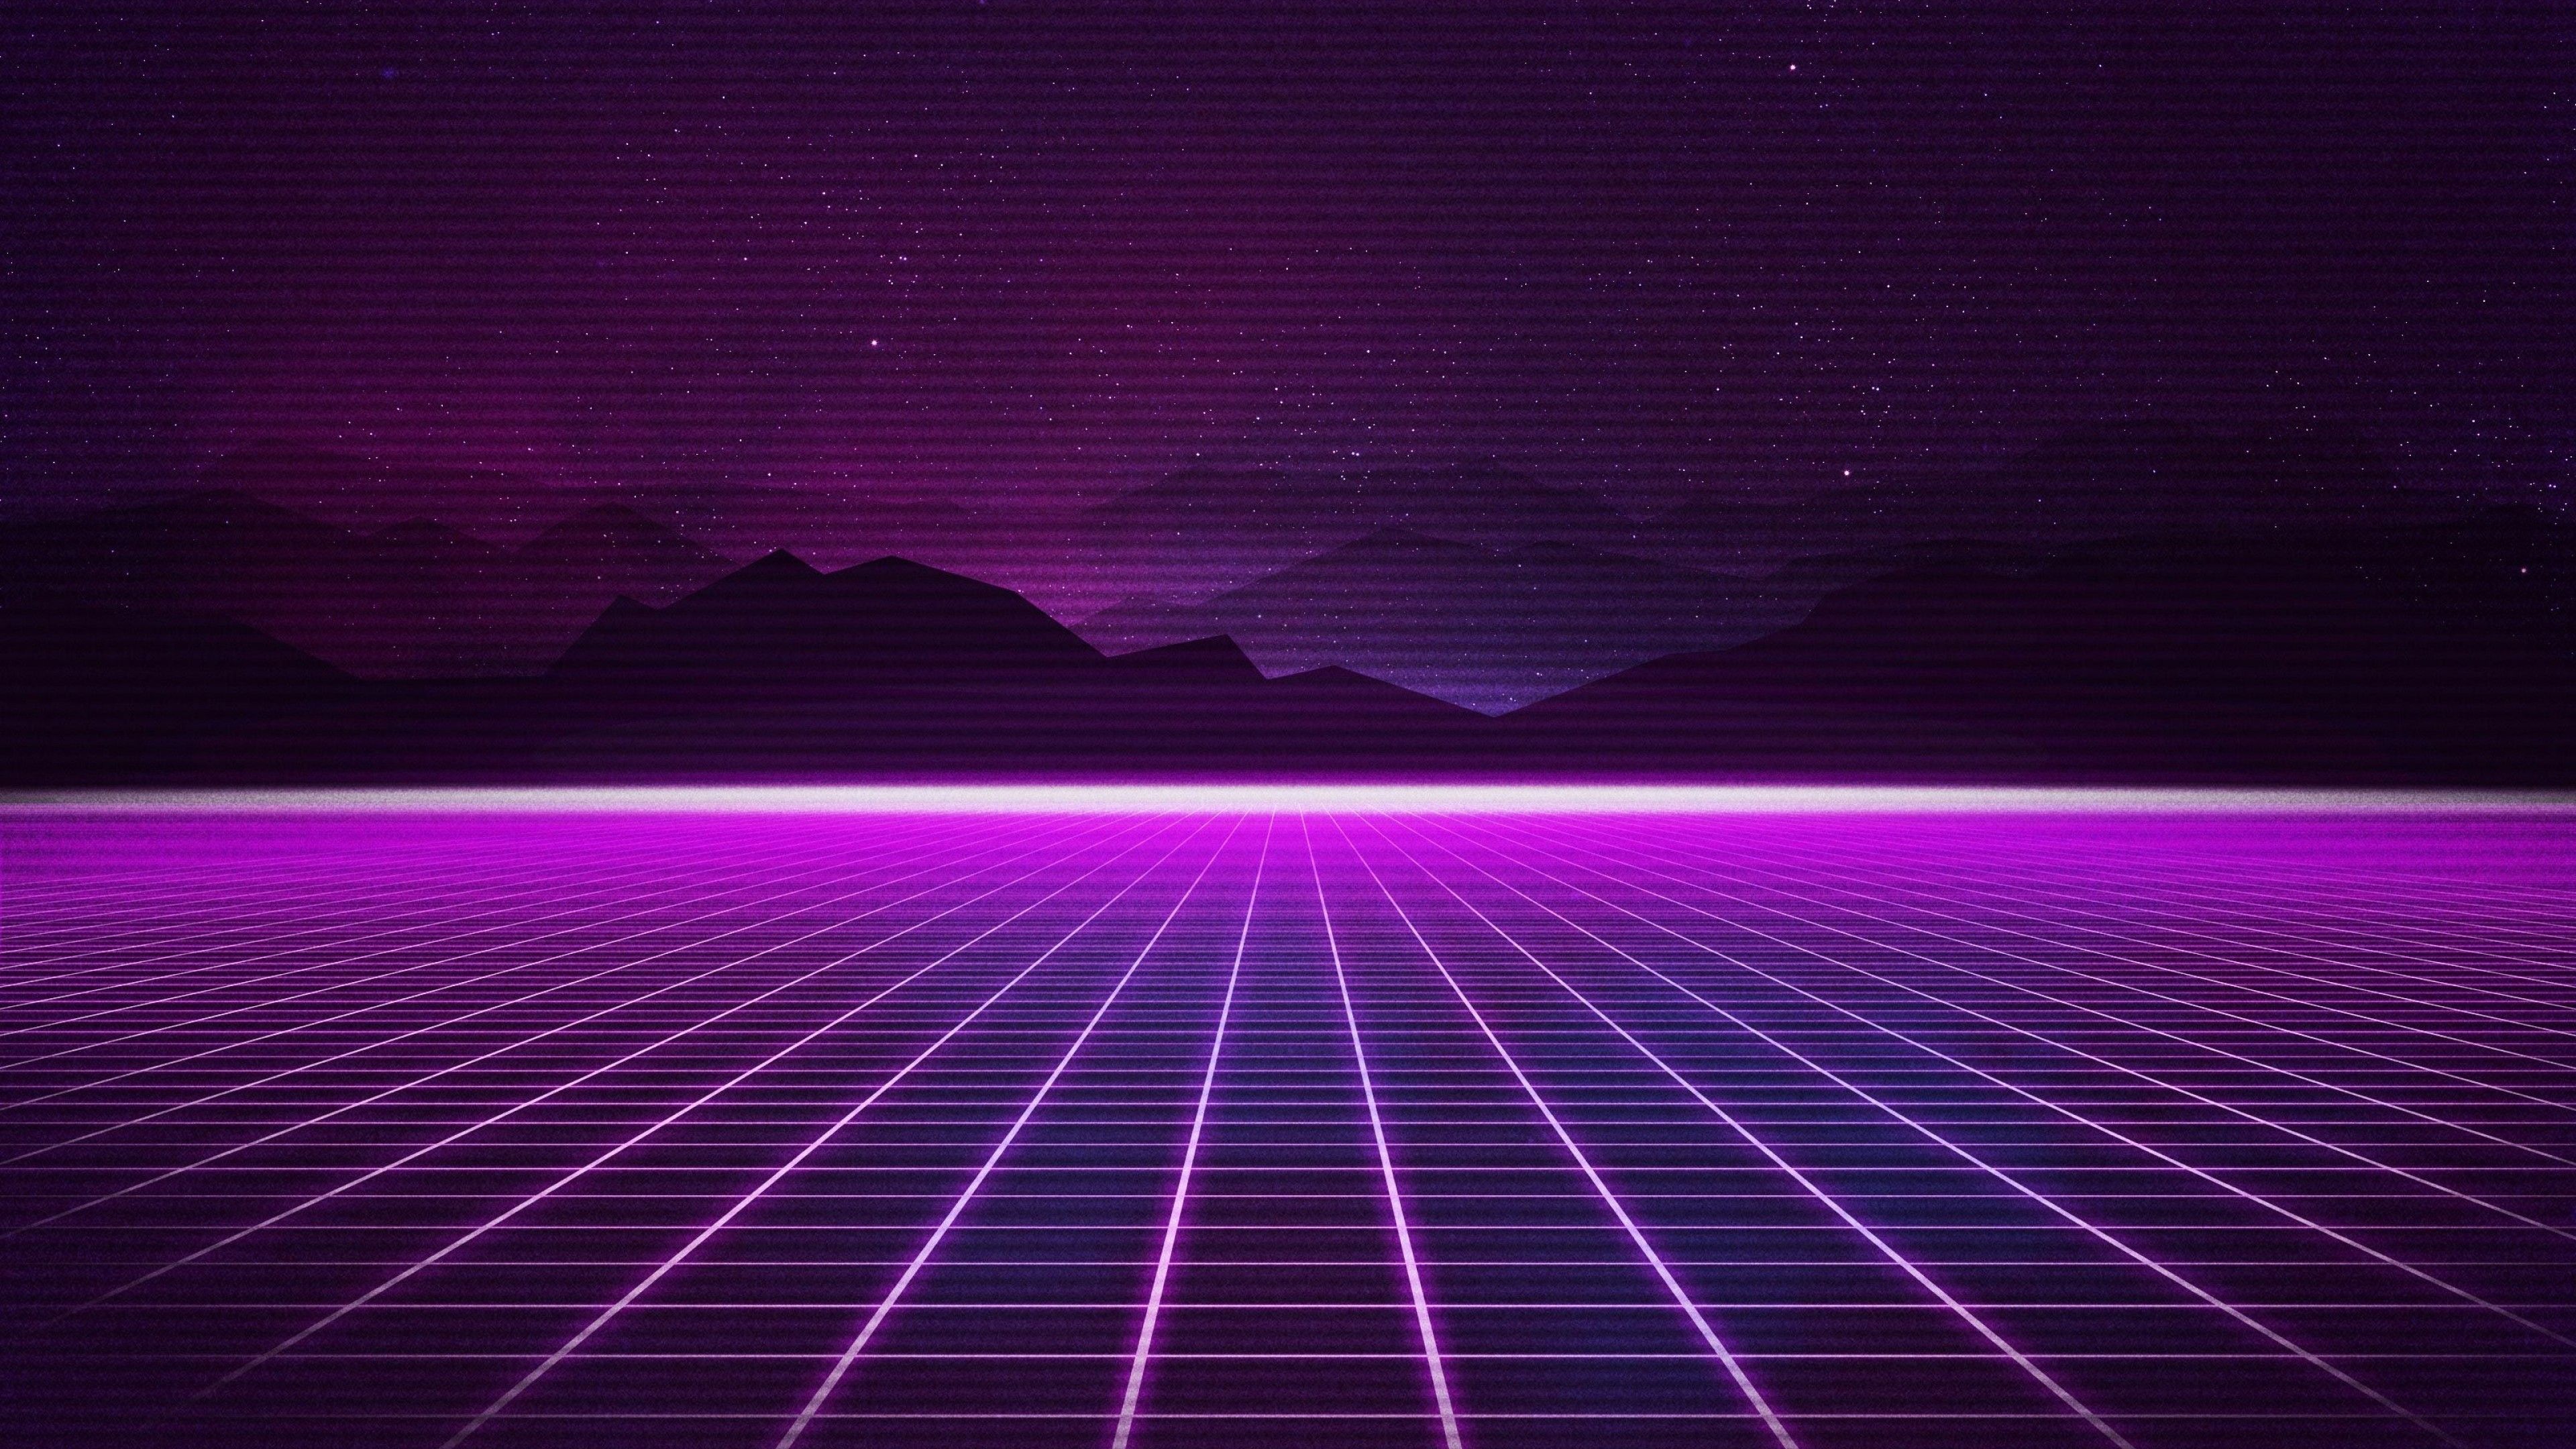 Retro futuristic background with neon lights and mountains - Synthwave, grid